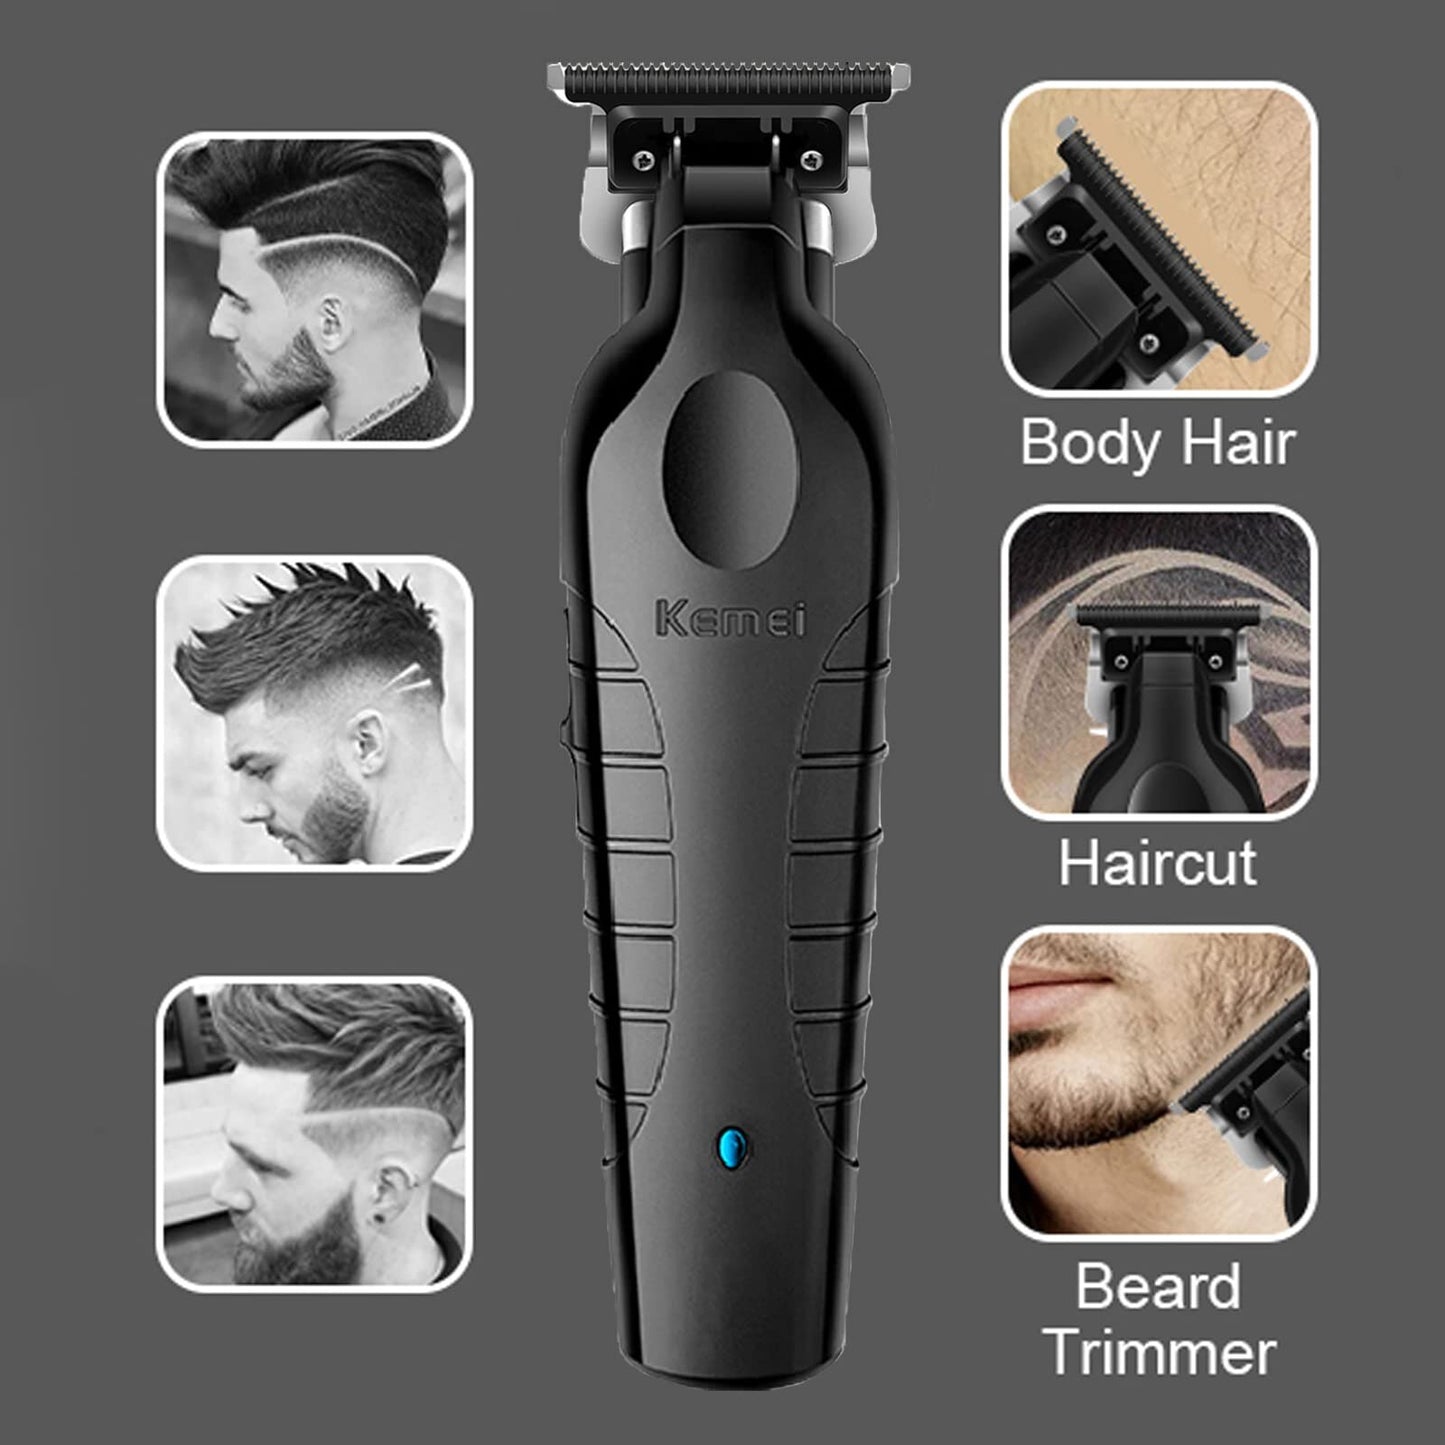 Kemei Black Hair Clippers For Men Cordless Clippers For Hair Cutting